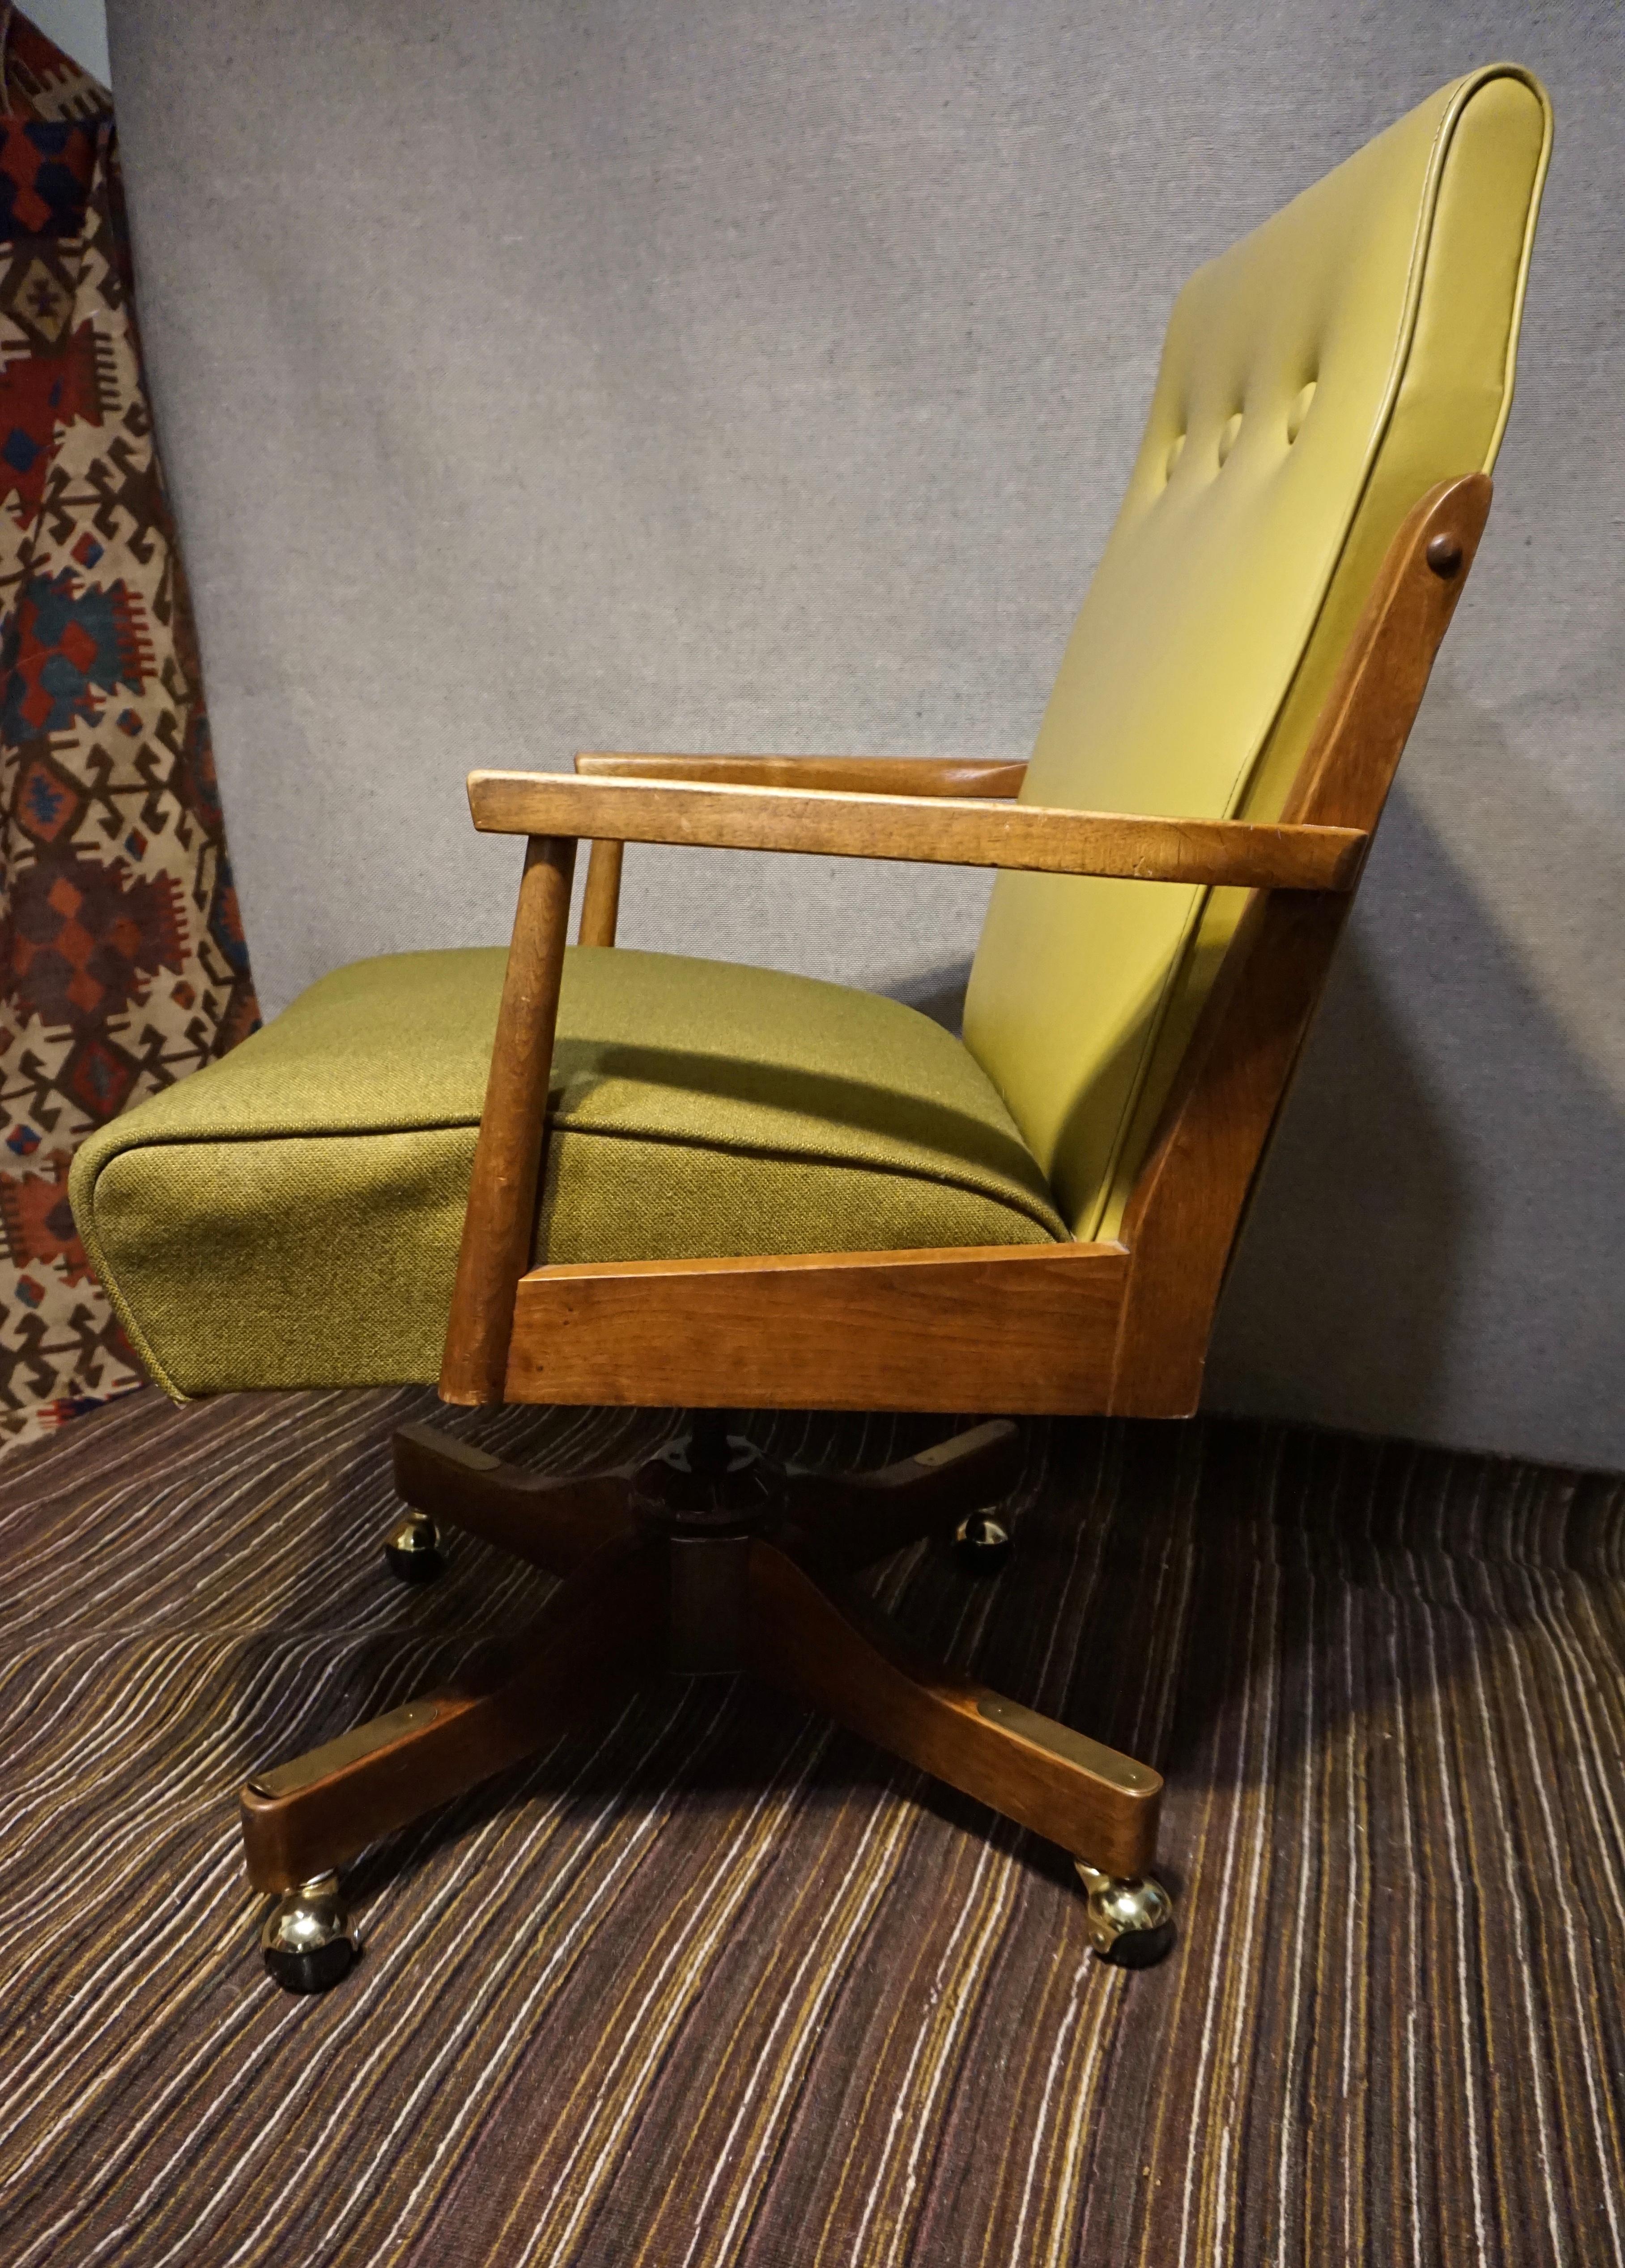 Circa 1960's

Teak revolving office armchair on detachable casters from the mid century. Original Vinyl backrest and fleck wool upholstery in excellent original condition save for single fray at base. Mechanism sound. Nice depth for extended thigh